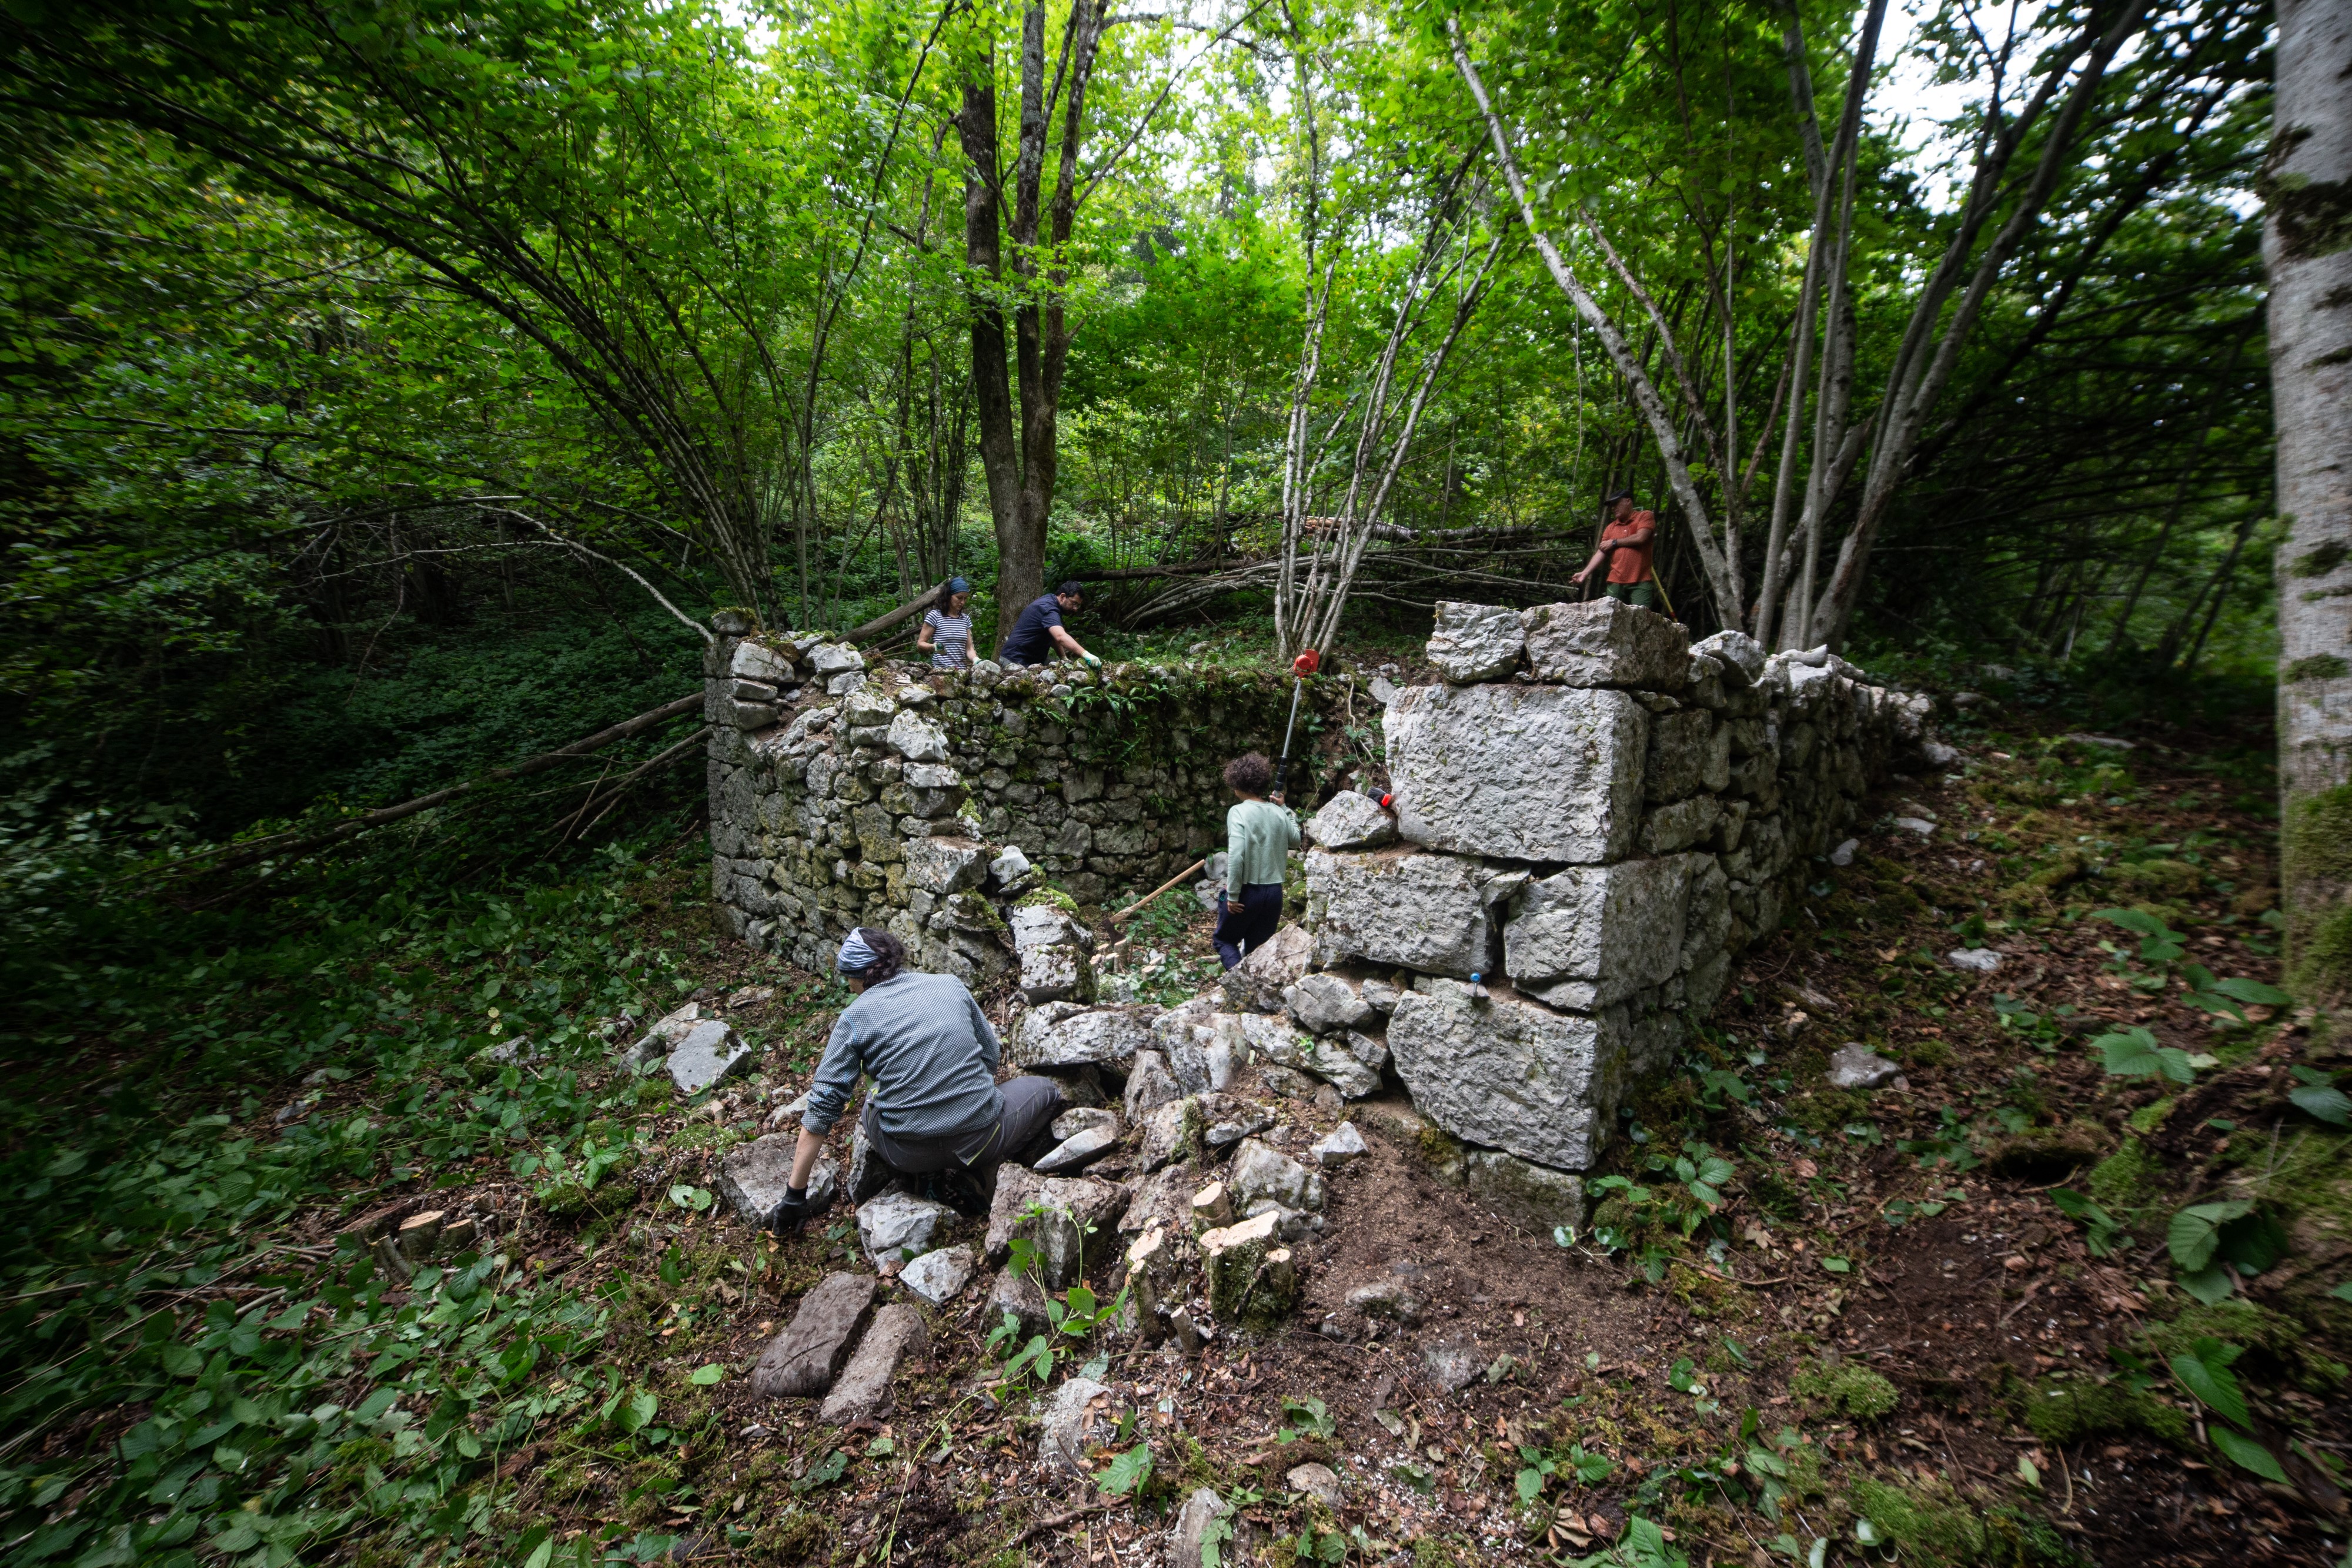 Archaeologists working on a ruinous building